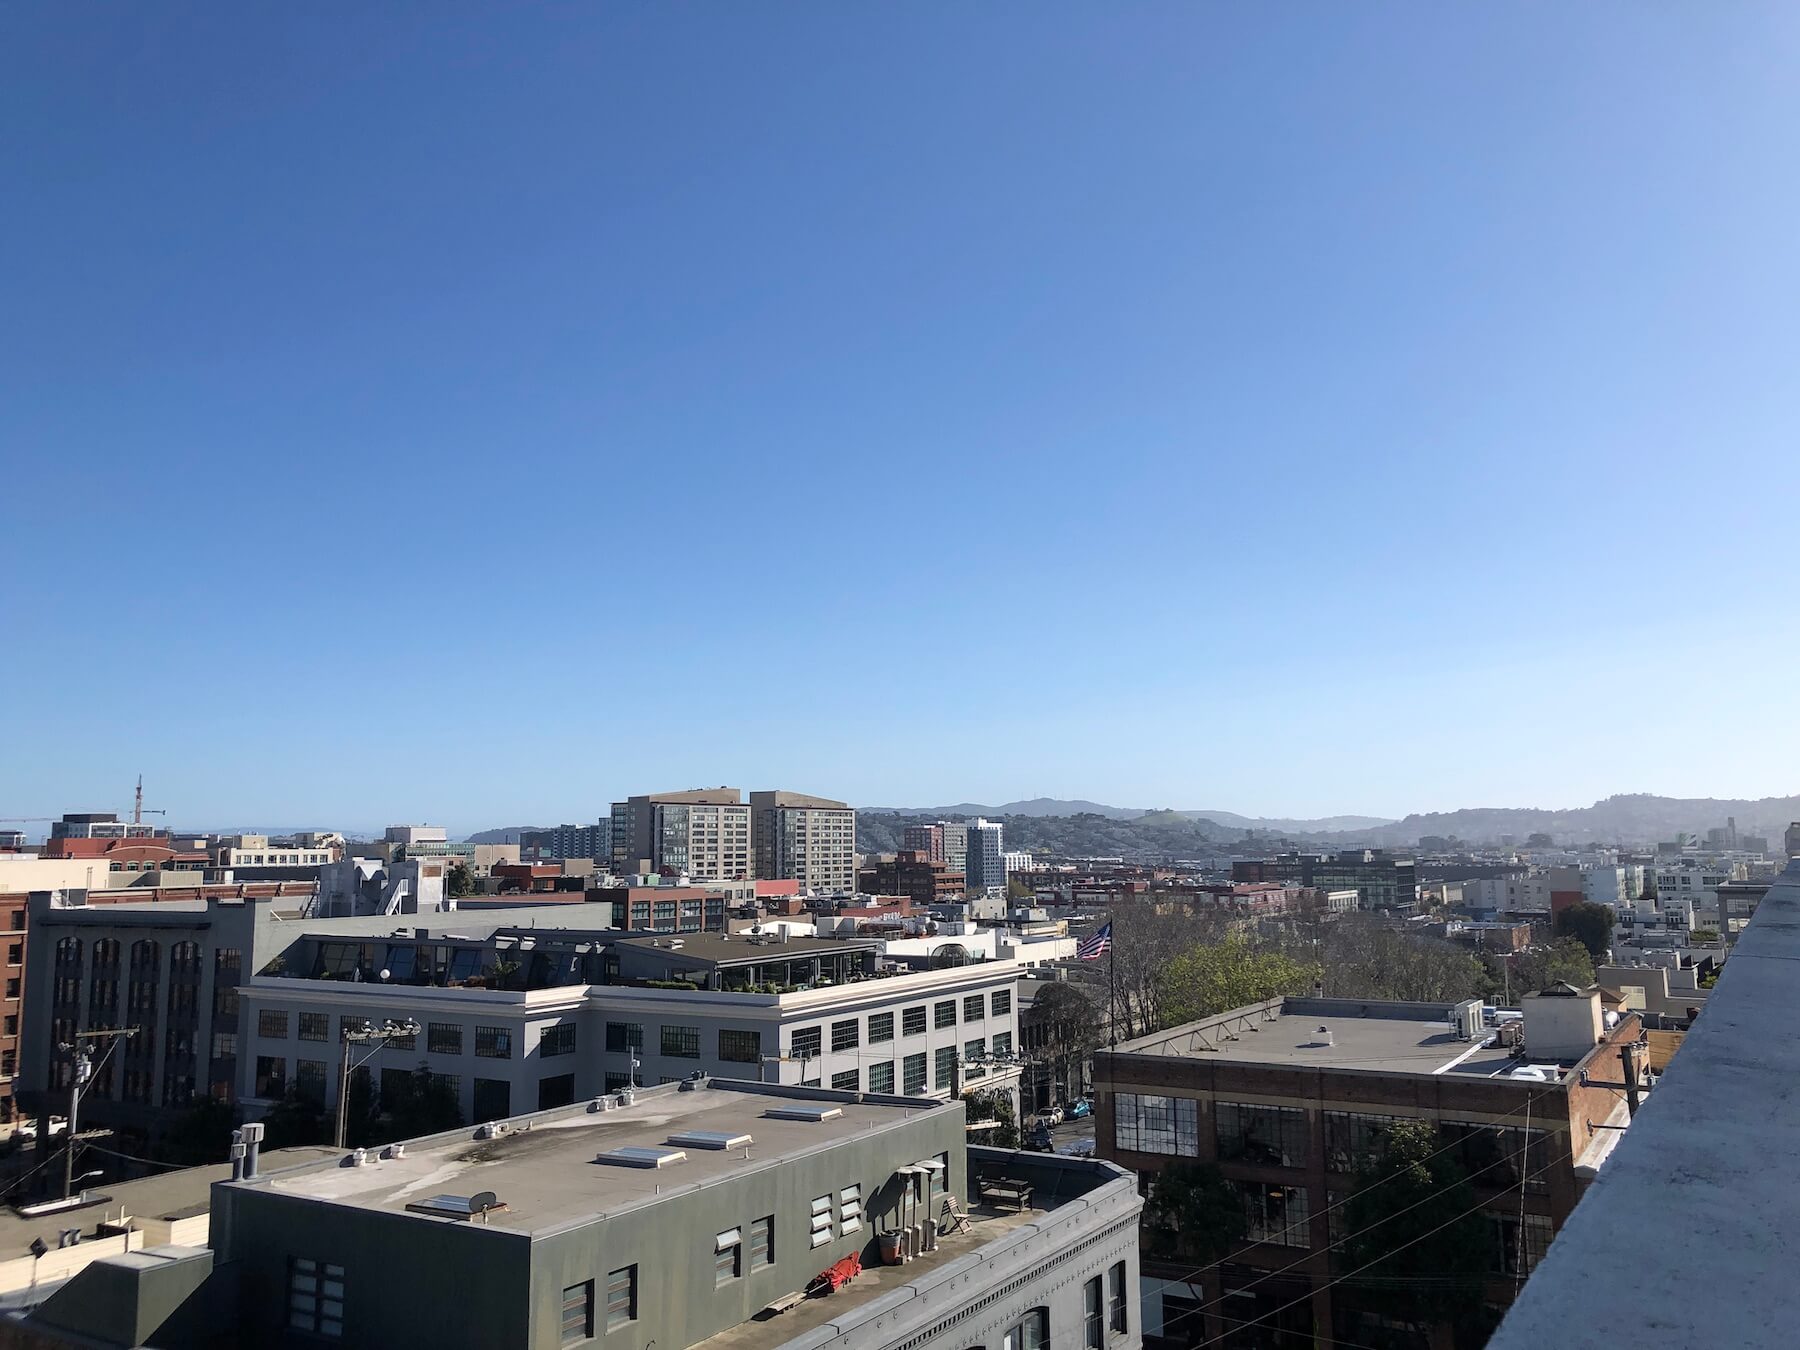 The view from Spoke's rooftop